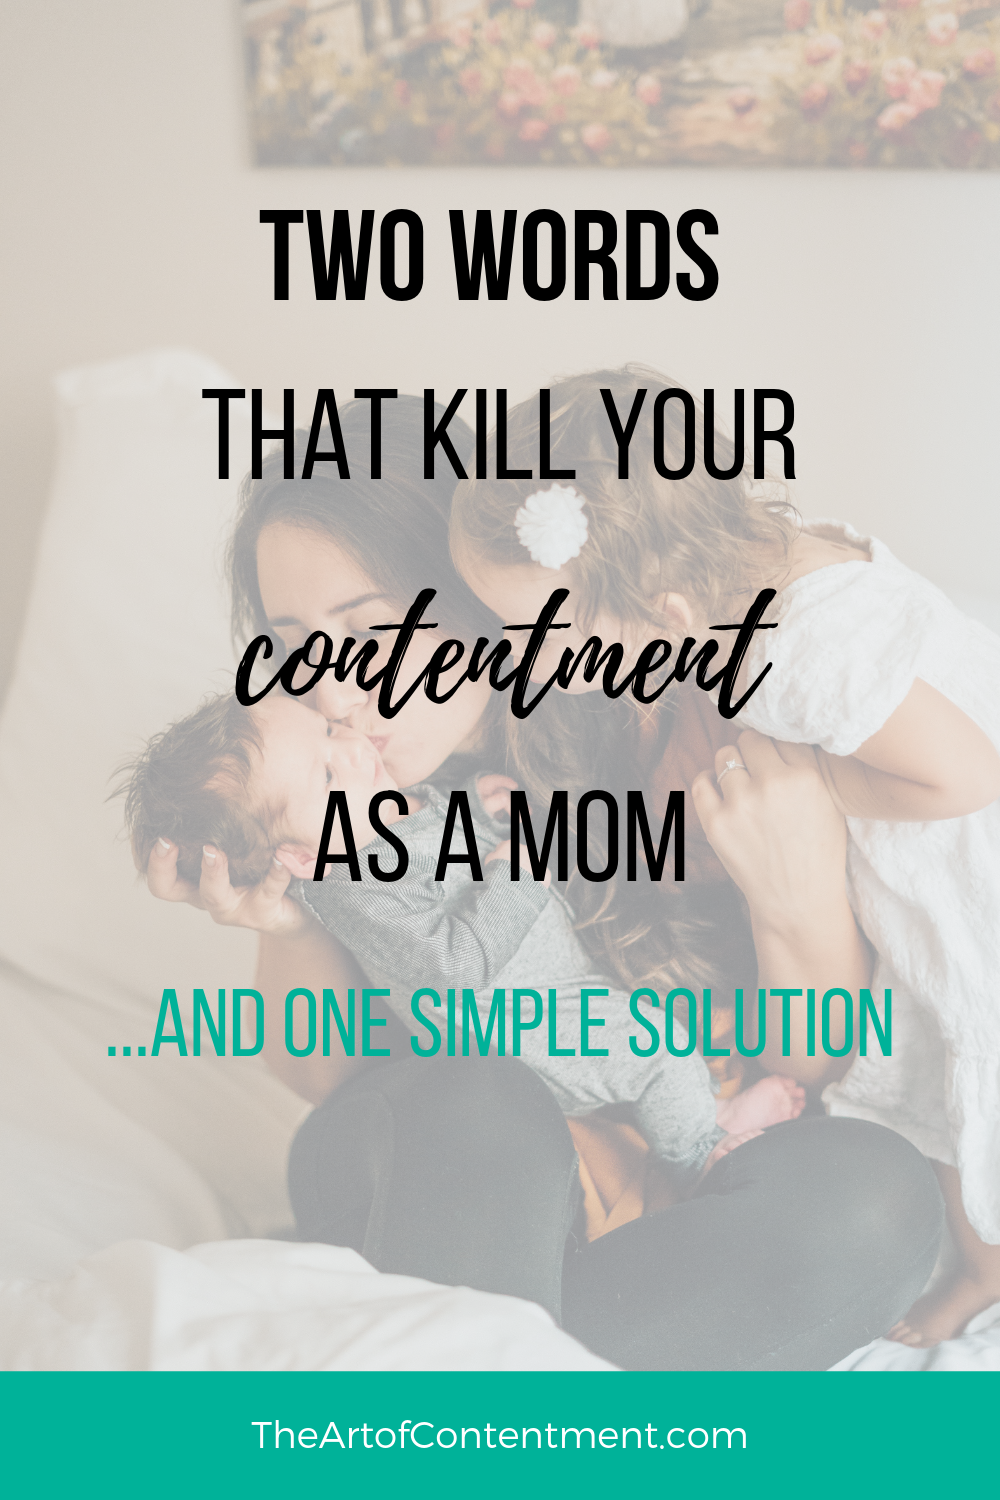 Are you dealing with resentment as a mom? Maybe you’ve fallen victim to two little words that are sure to kill your contentment as a mom. Join me as we uncover this sneaky attitude and learn a simple change that will bring greater peace to your home and your heart.